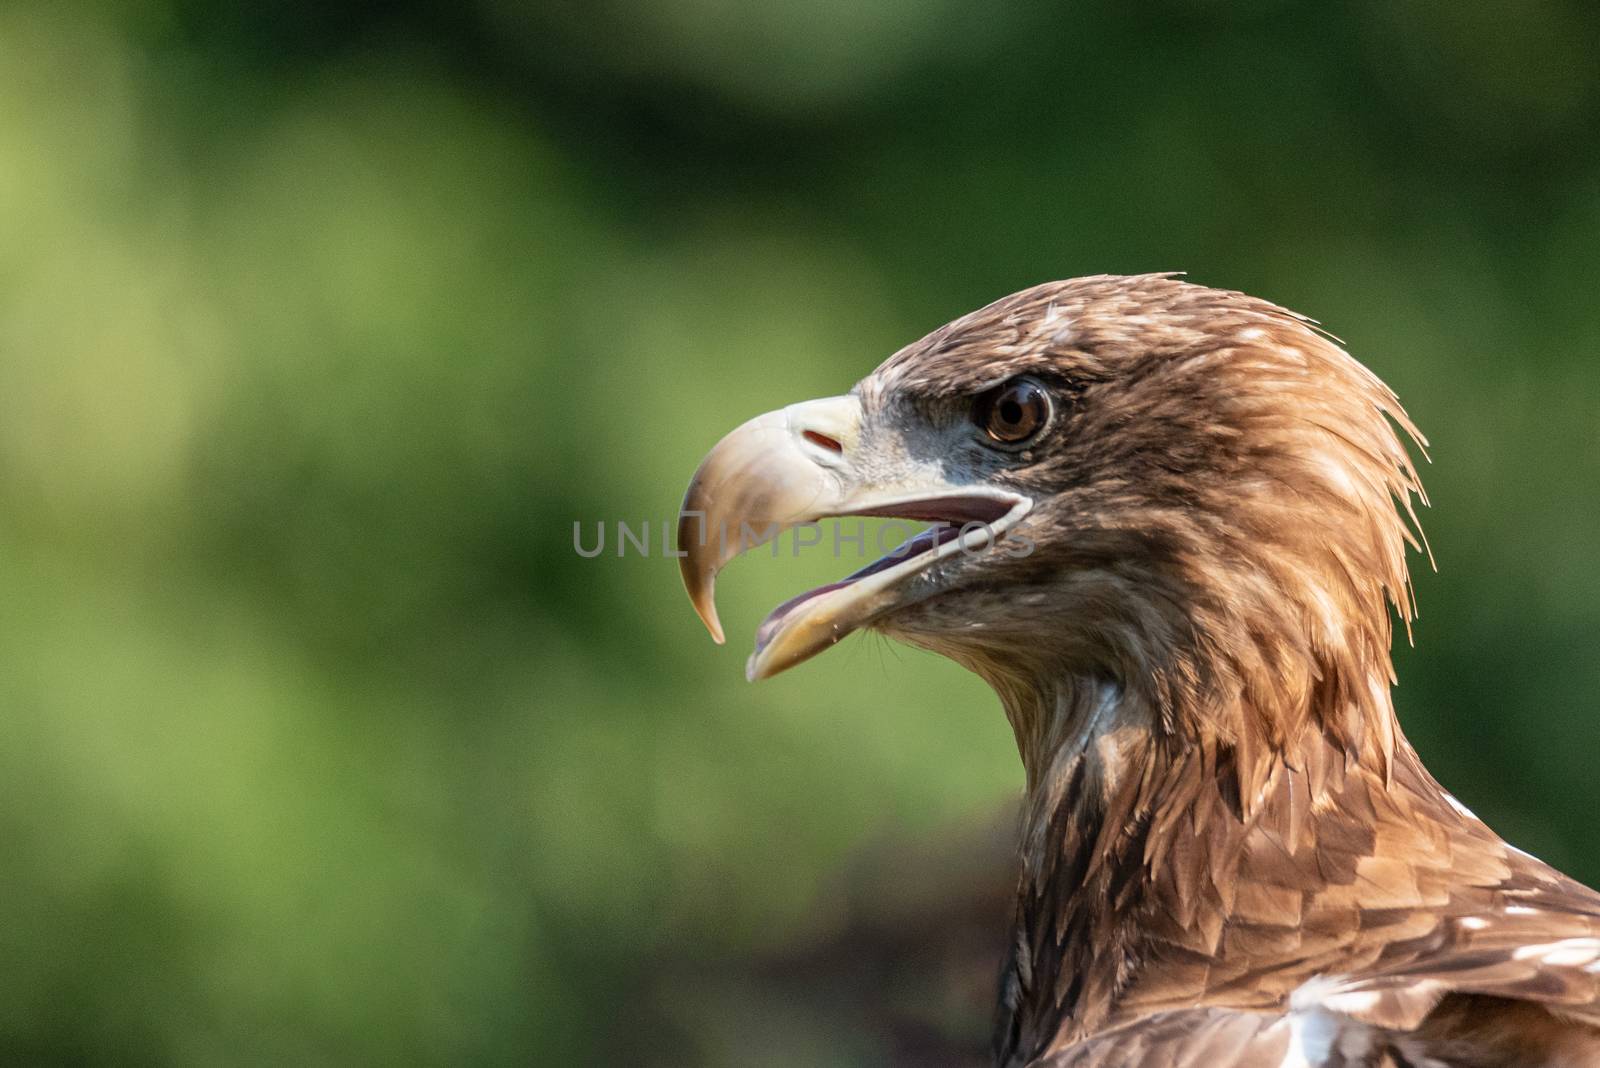 Close-up portrait of a golden eagle, a large American bird taken outdoors on a natural green background